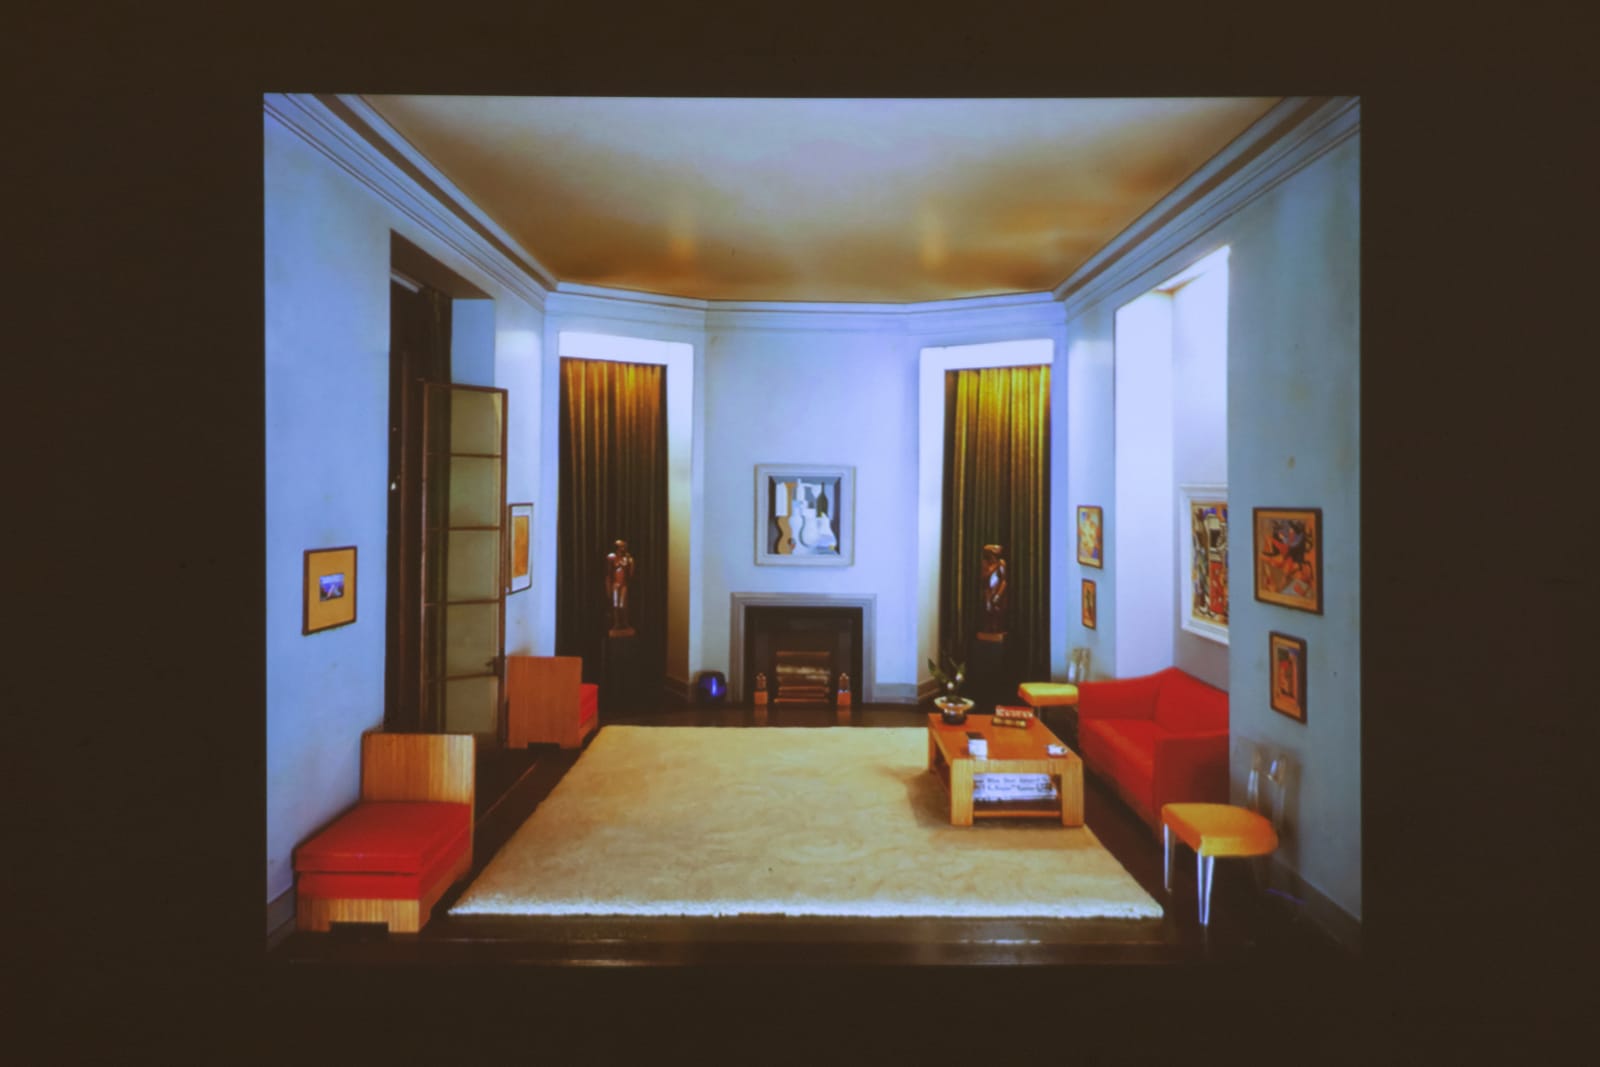 Gordon Hall, Thorne Miniature Room "California Hallway c. 1940" Projected at Actual Size, 2021